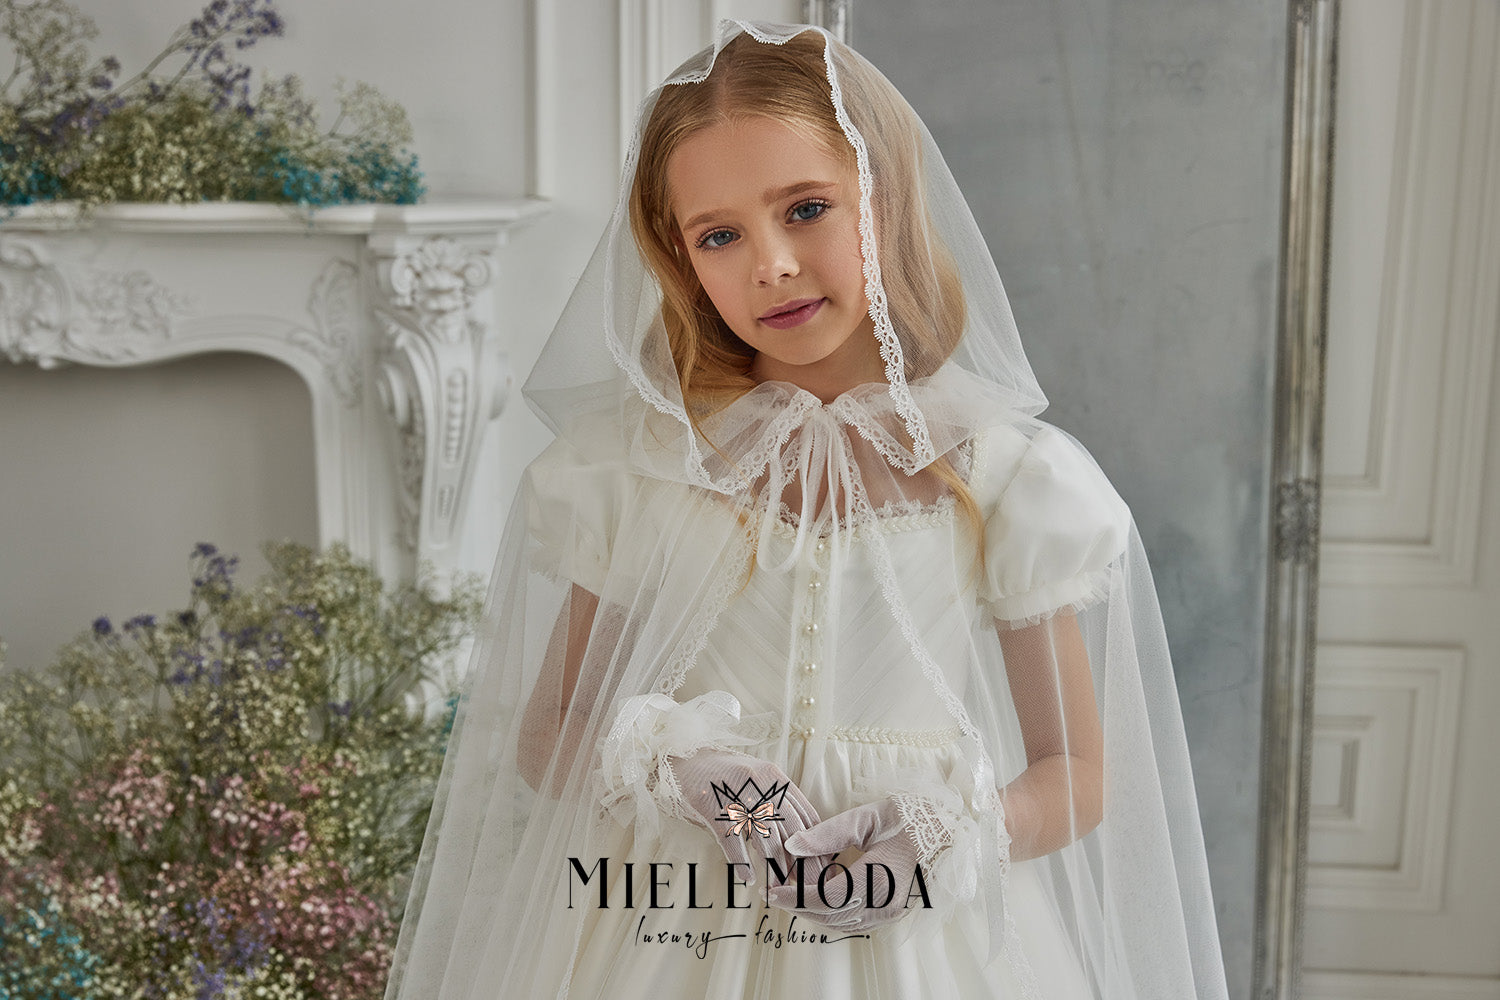 Young girl wearing a first communion dress, veil cape and gloves standing in front of a fireplace covered in flowers